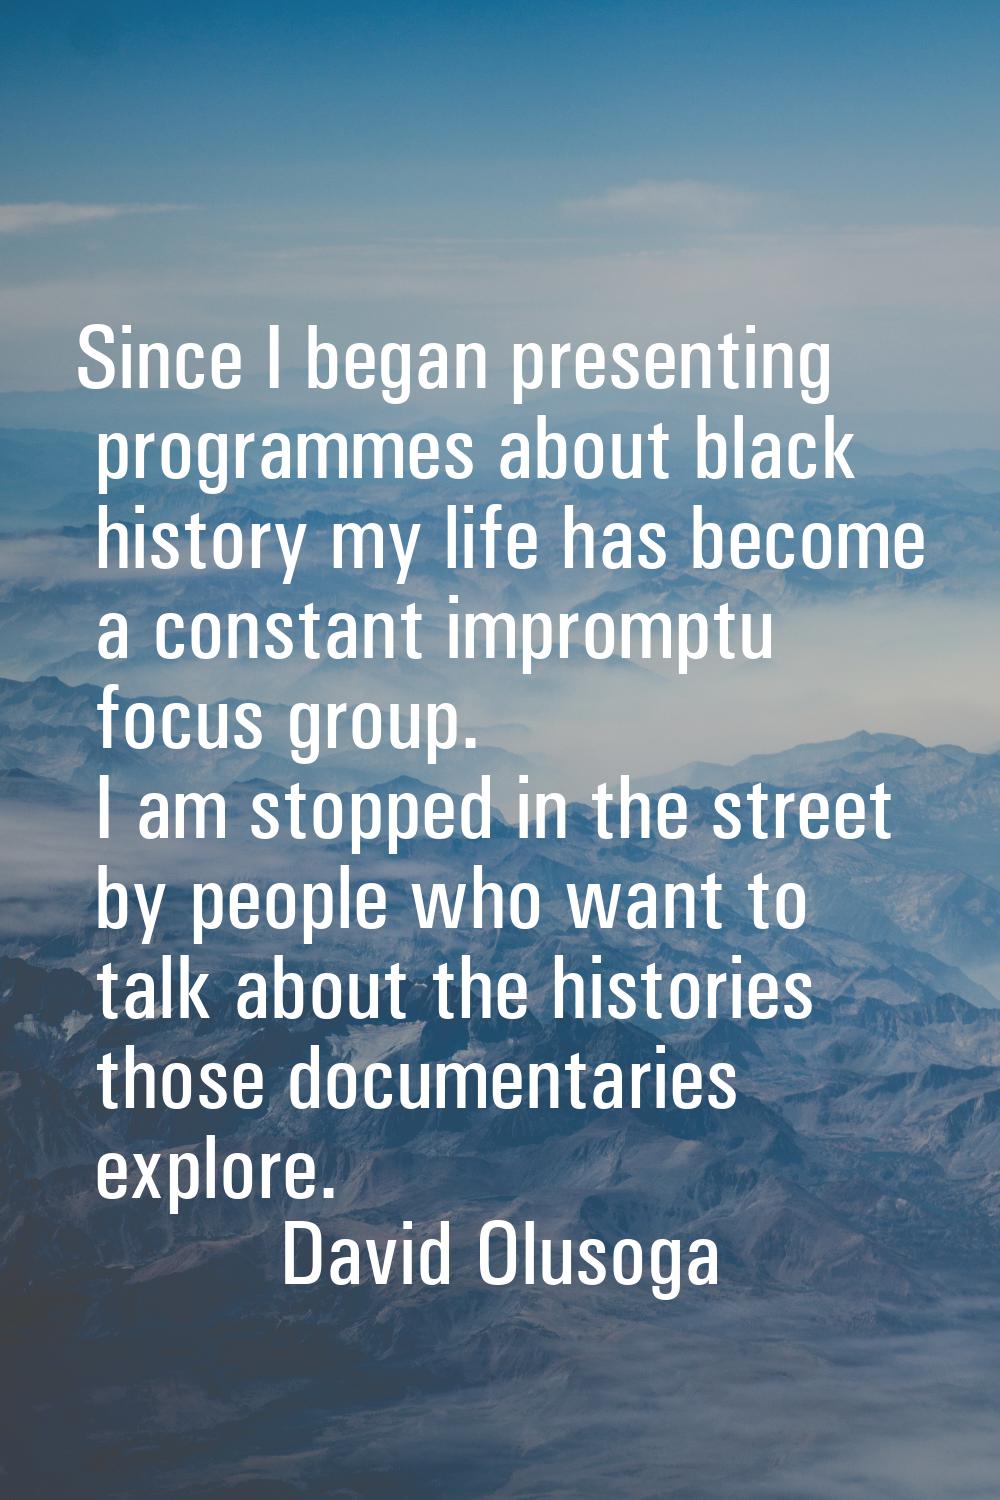 Since I began presenting programmes about black history my life has become a constant impromptu foc